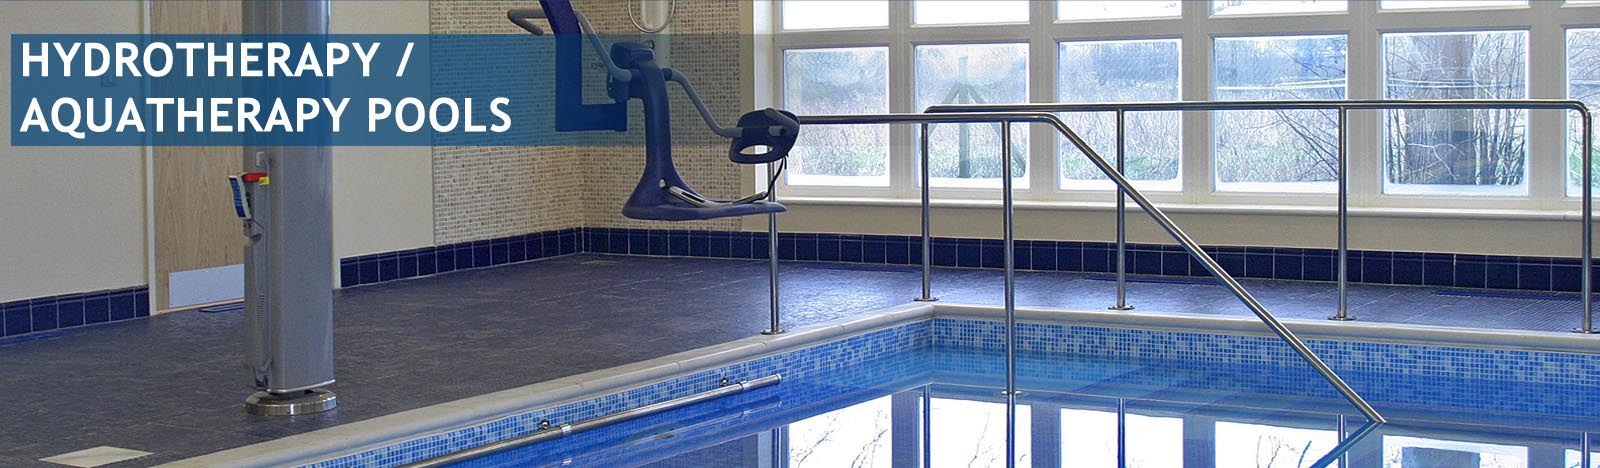 hydrotherapy pools specialists london